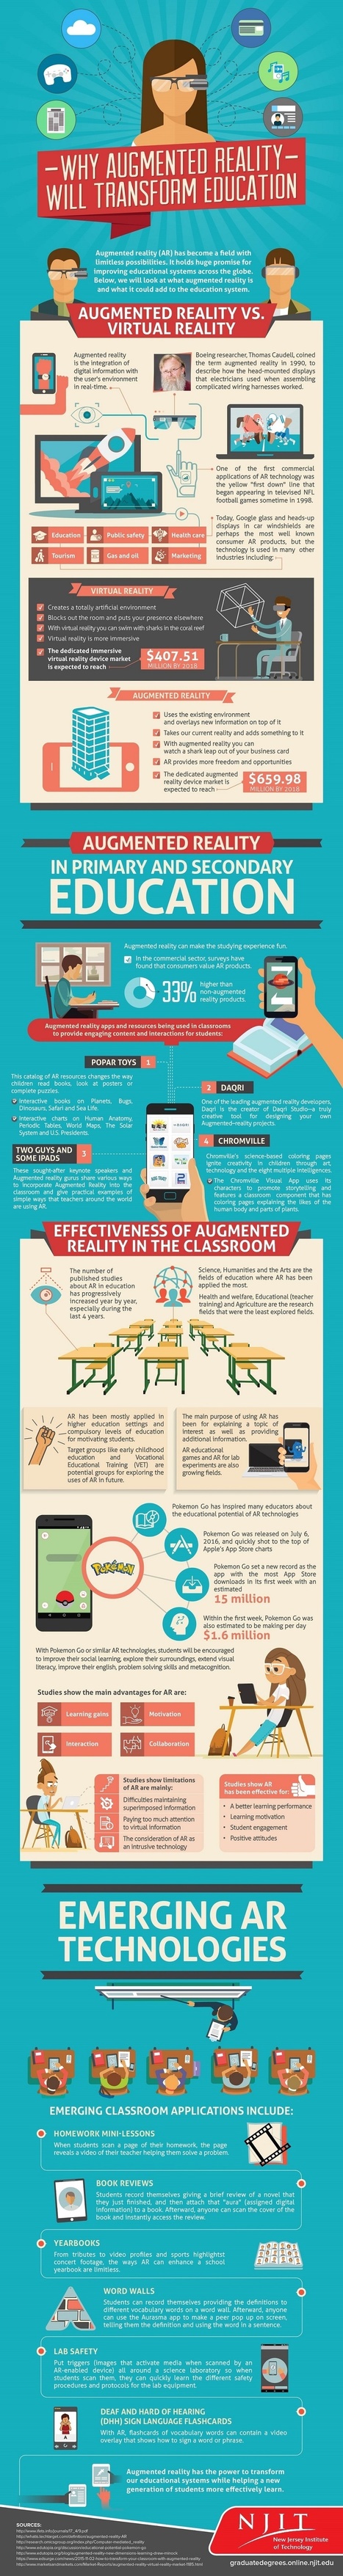 Why Augmented Reality Will Transform Education Infographic - e-Learning Infographics | Learning & Technology News | Scoop.it